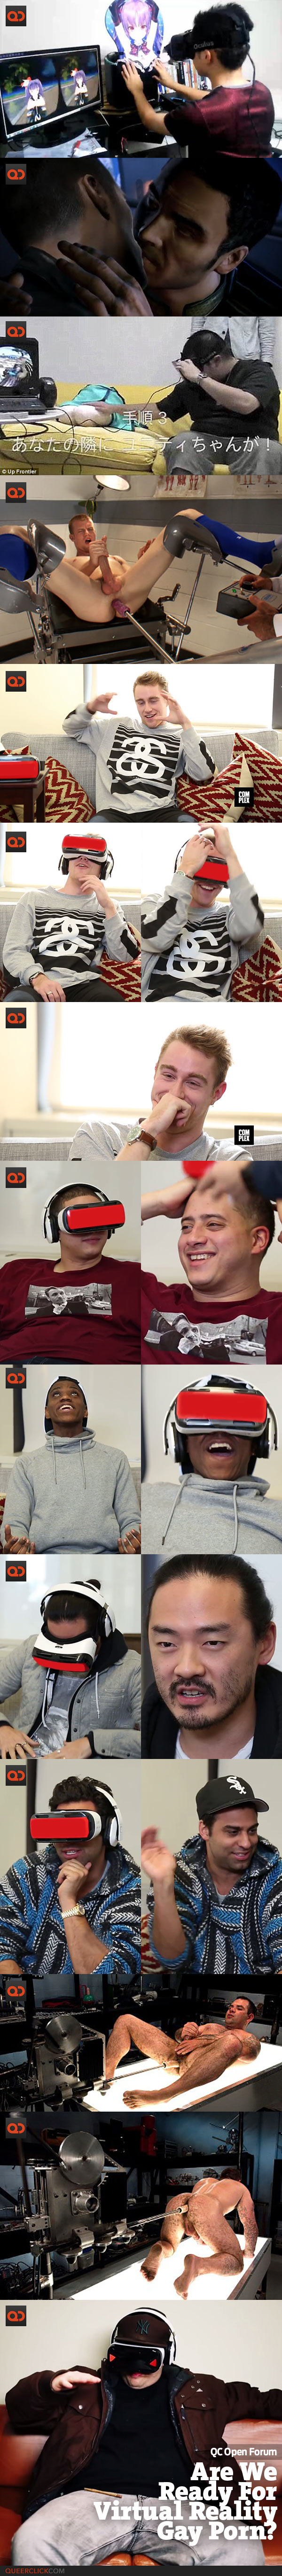 QC Open Forum: Are We Ready For Virtual Reality Gay Porn?